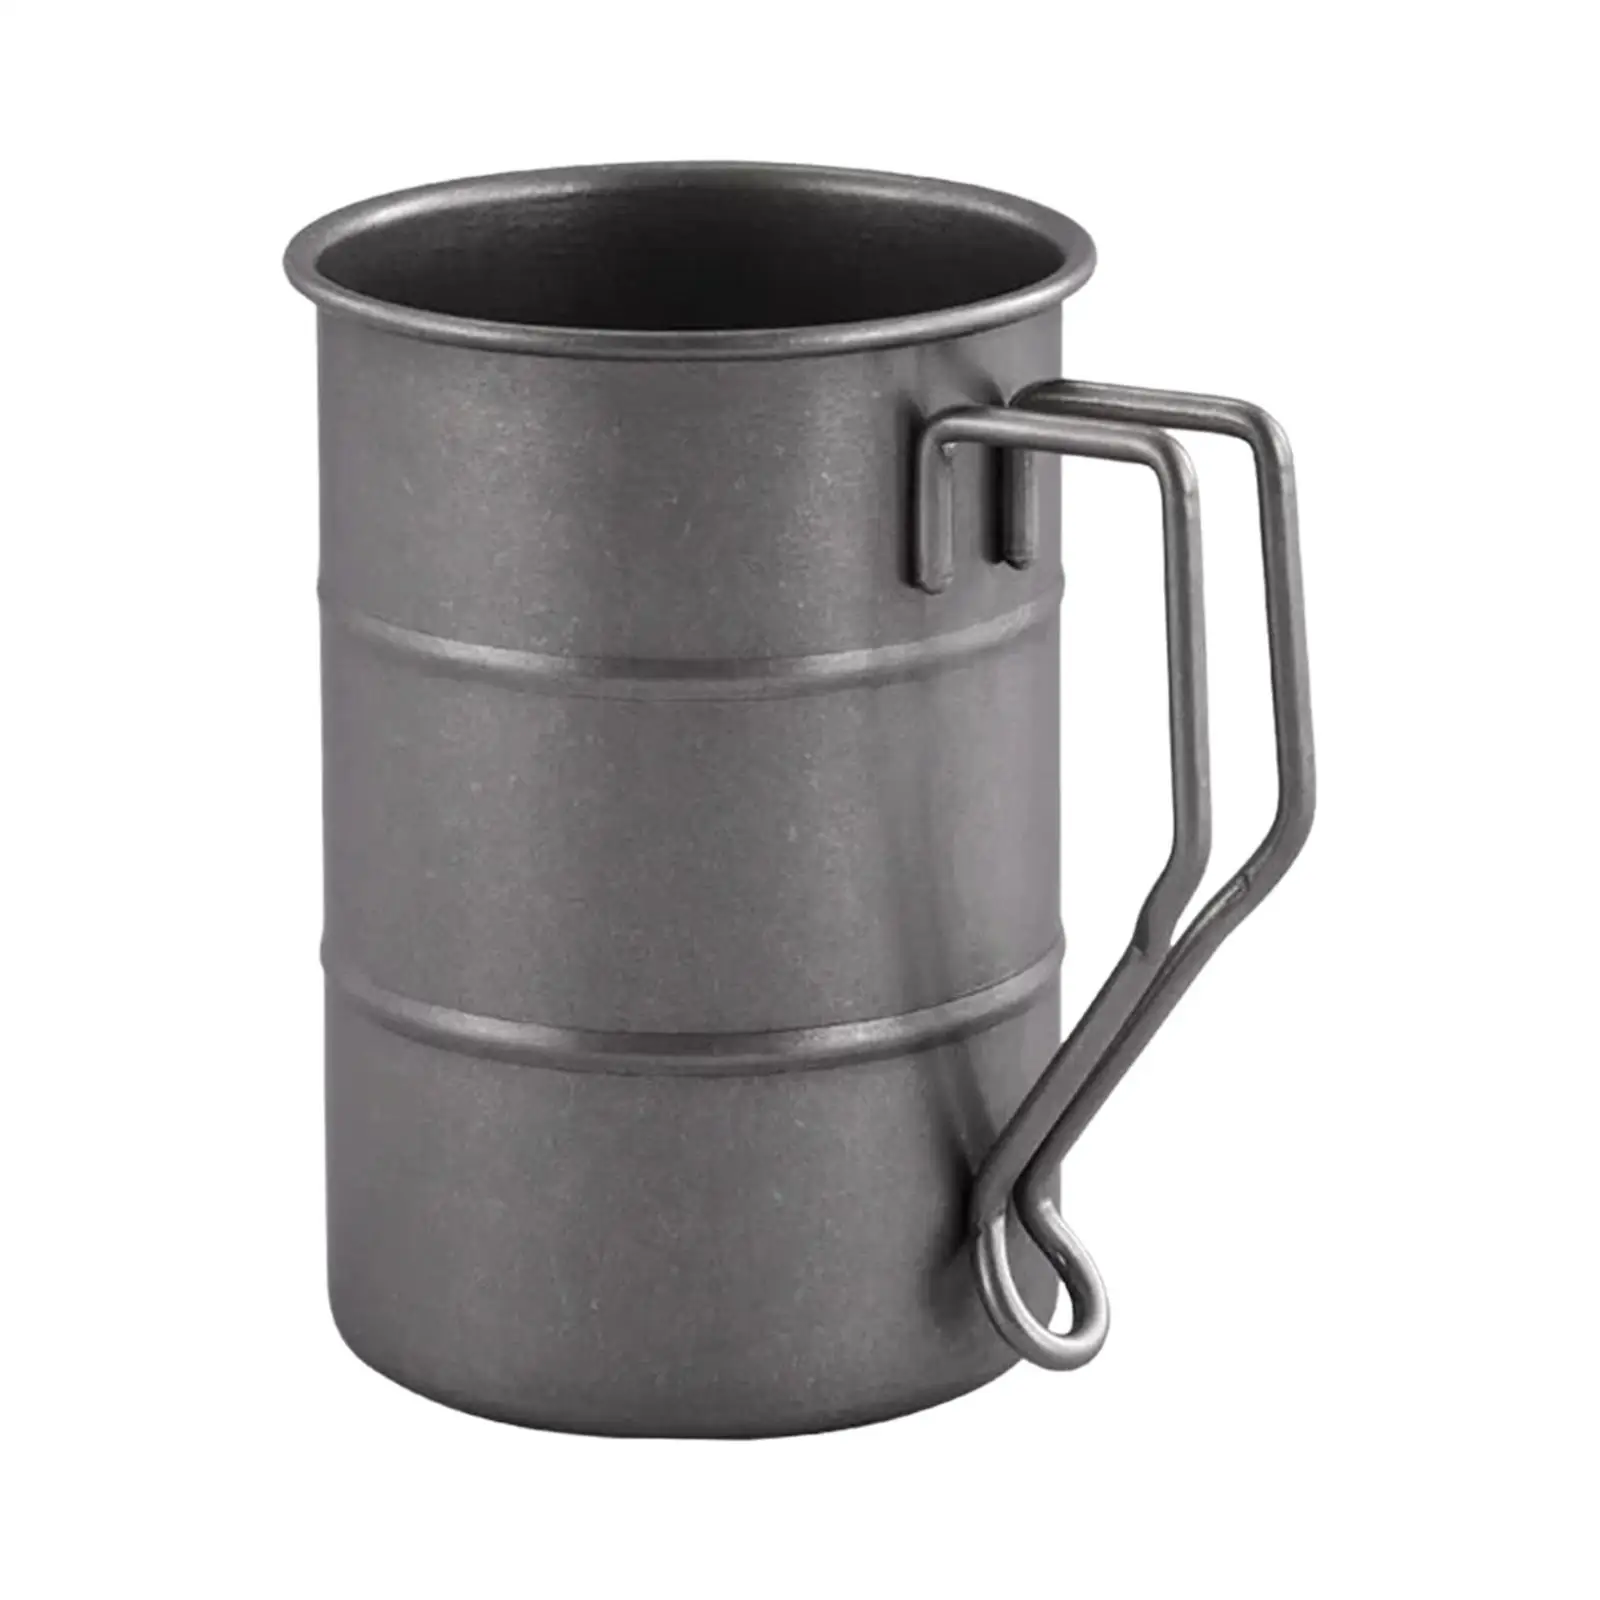 Drinking Cup Cold Water Cup Reusable Stainless Steel Milk Mugs Gargle Cups Tea Mugs for Outdoor Hiking Kitchen Fishing Travel